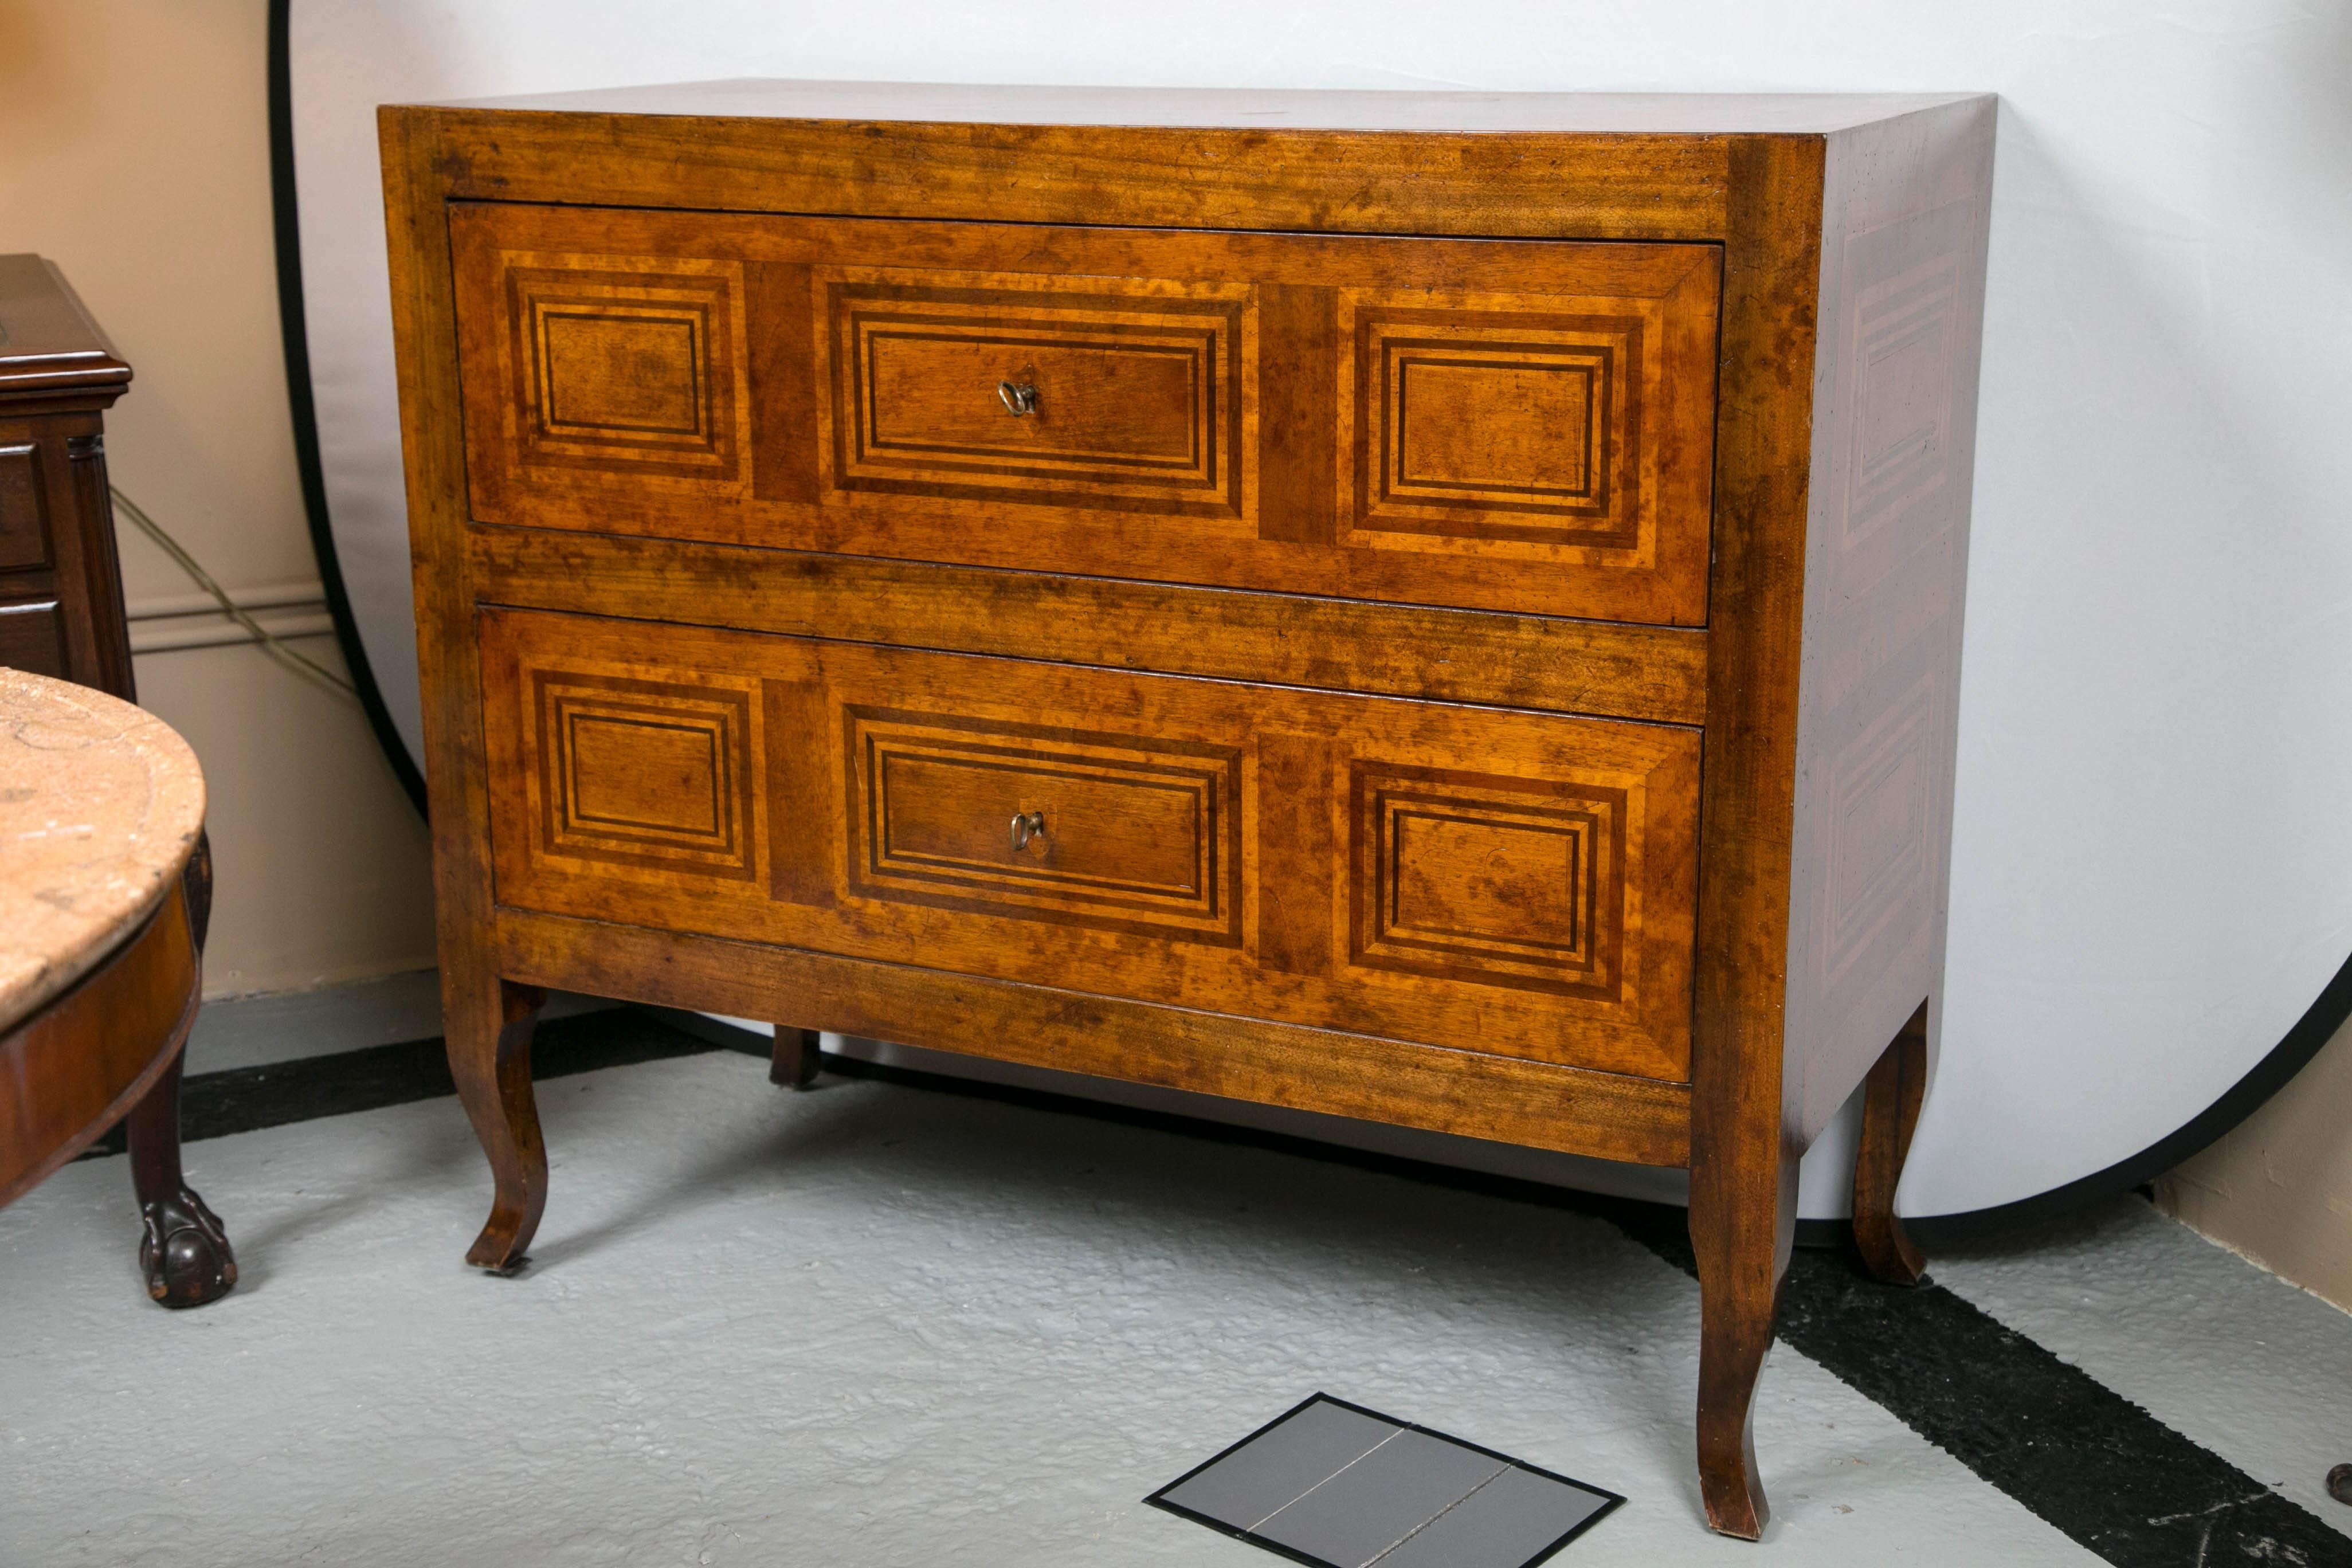 A two-drawer Italian handmade inlaid Continental style commode. Fine quality vintage commode with geometric design inlays on the front, sides and top. Having all the old world charm one would like in a continental commode. Fine to sit on its own or